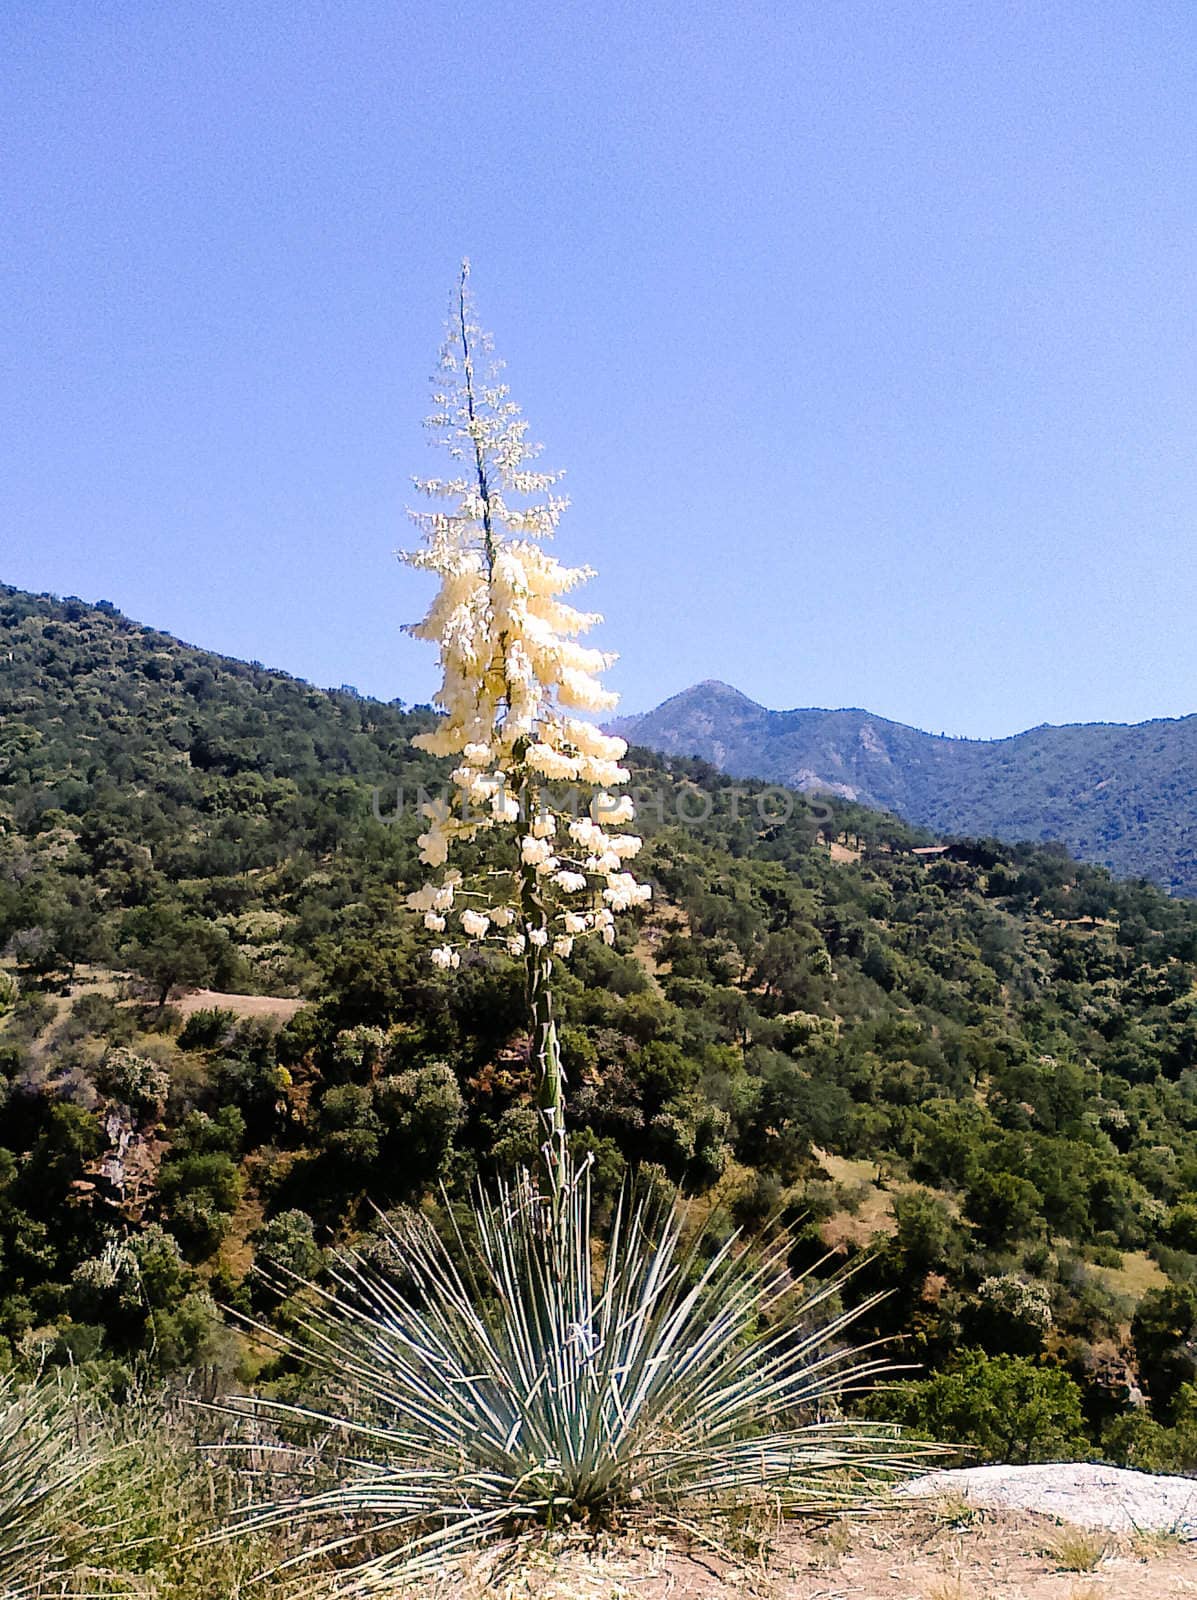 Chaparral yucca by melastmohican